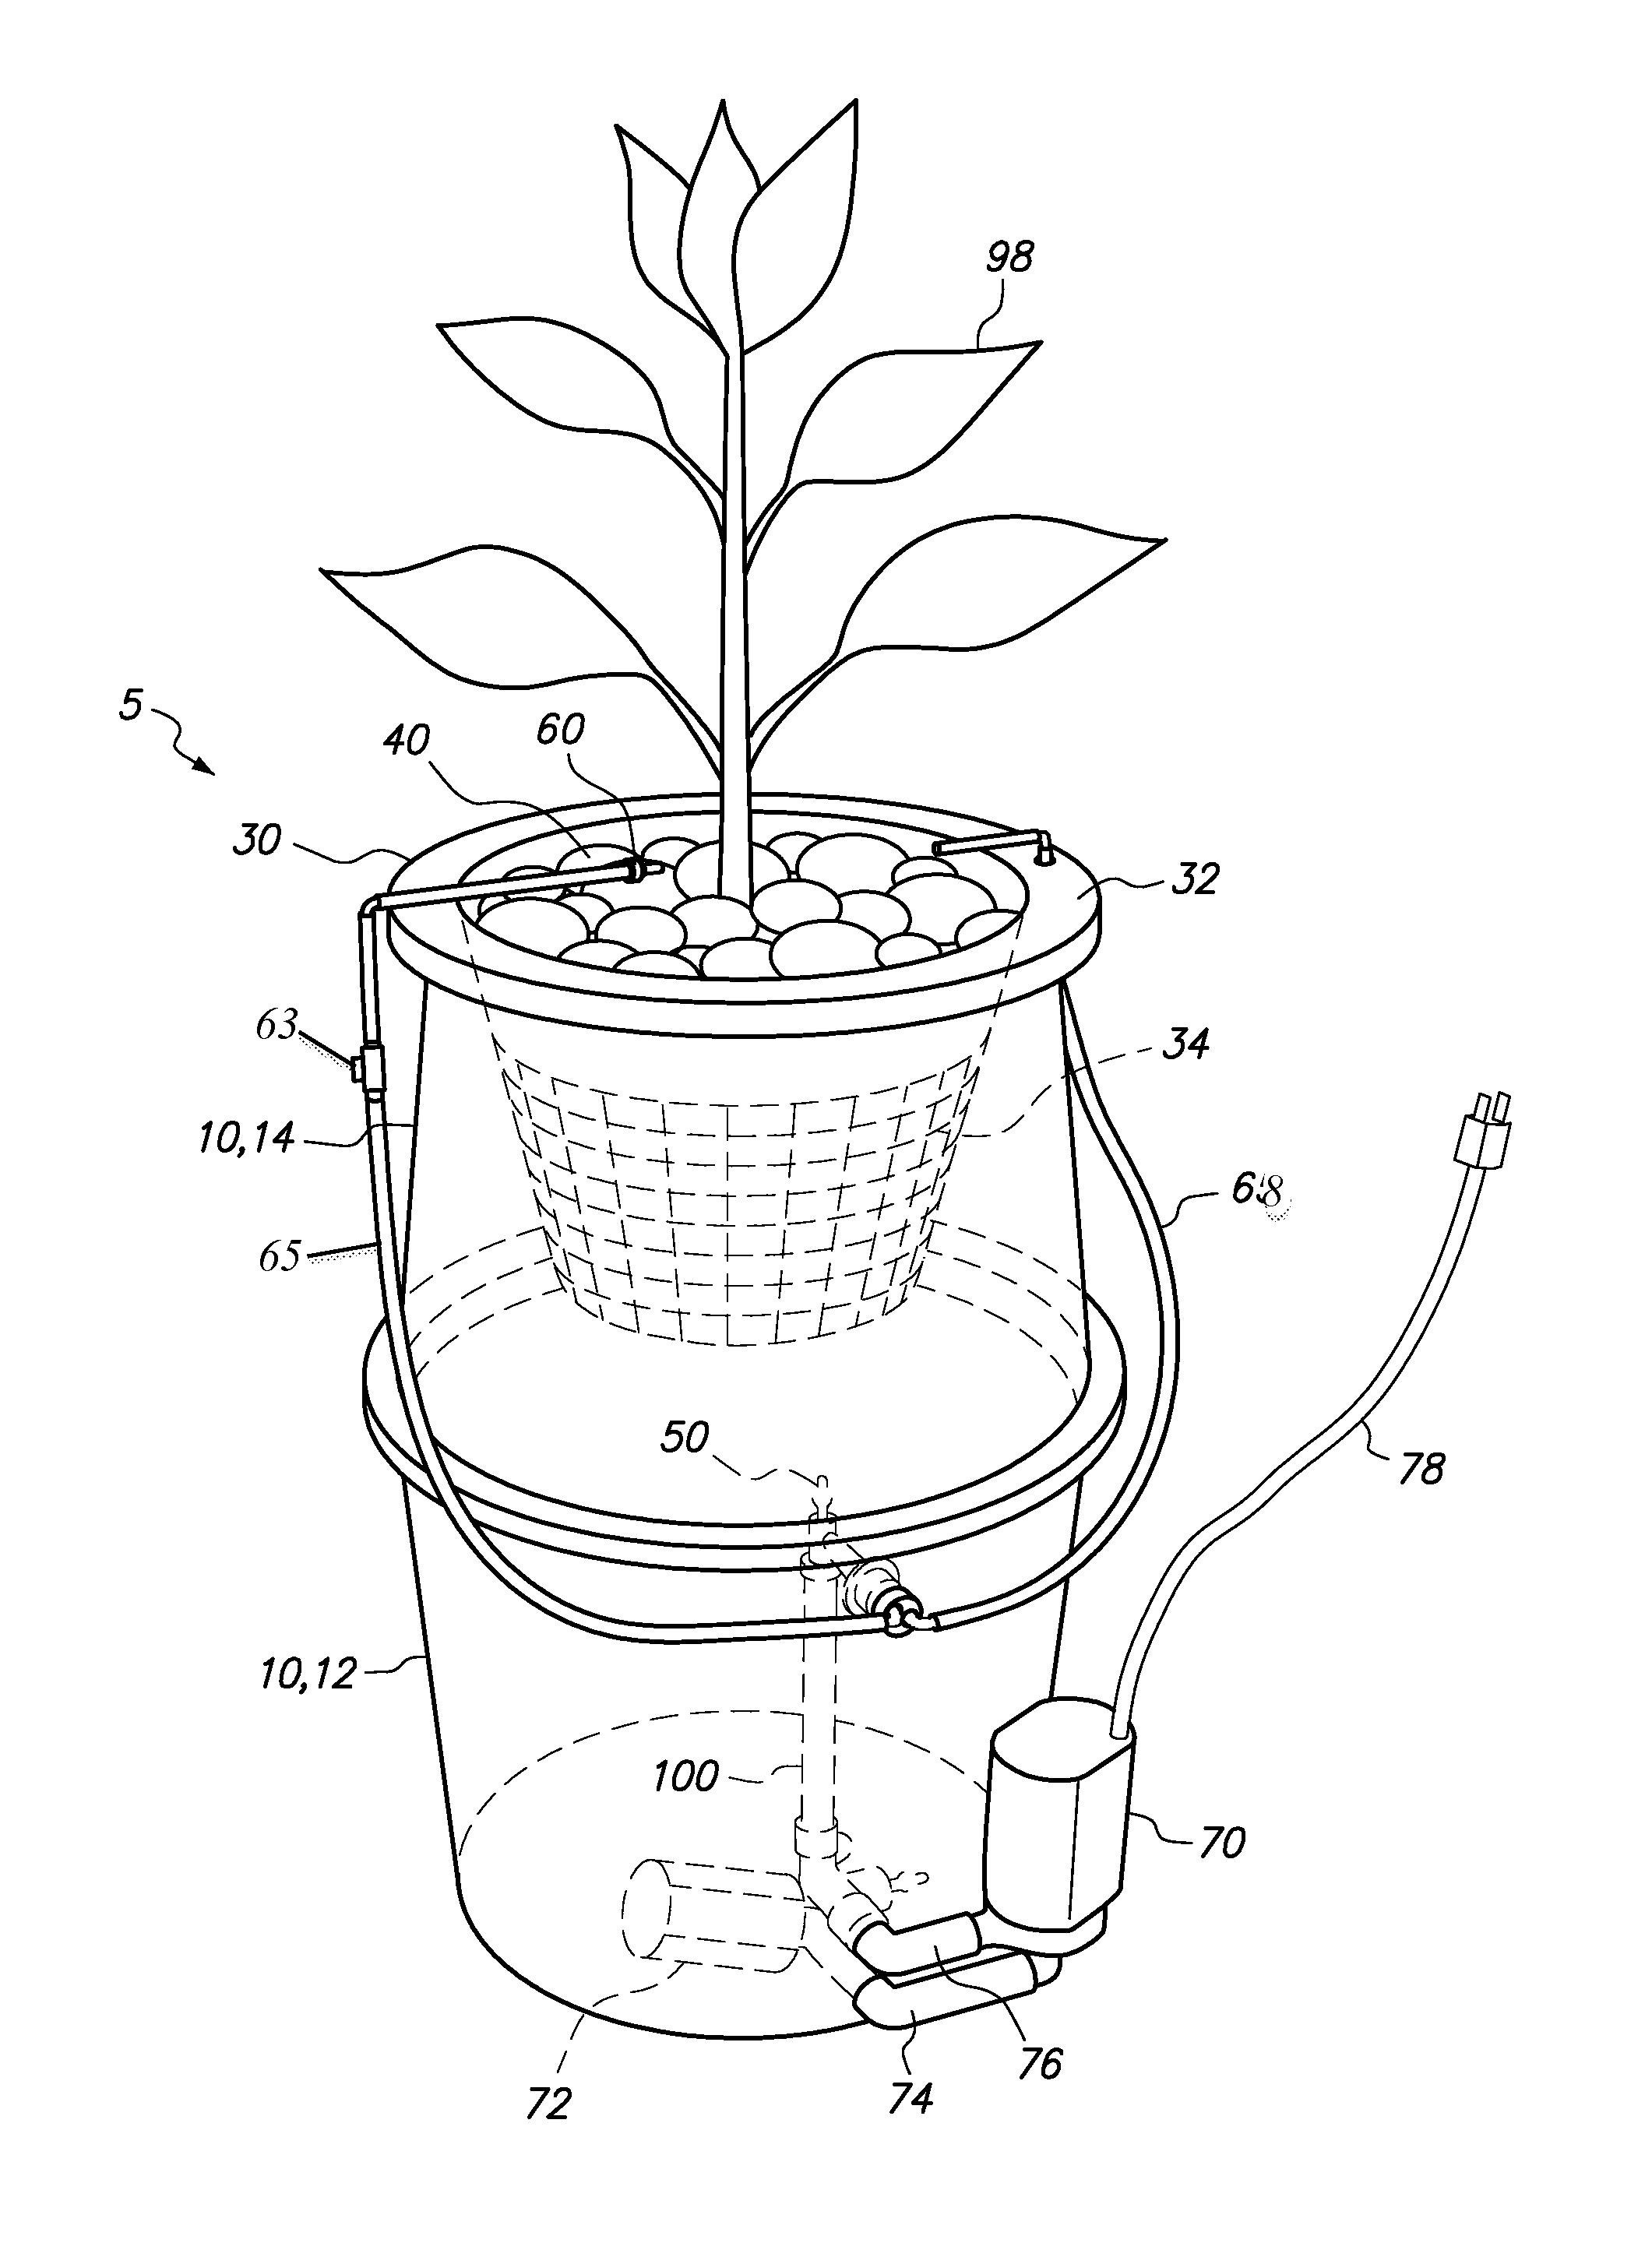 Hydroponic plant container with highly oxygenated nutrient solution using continuous air injection and continuous coriolis effect mixing